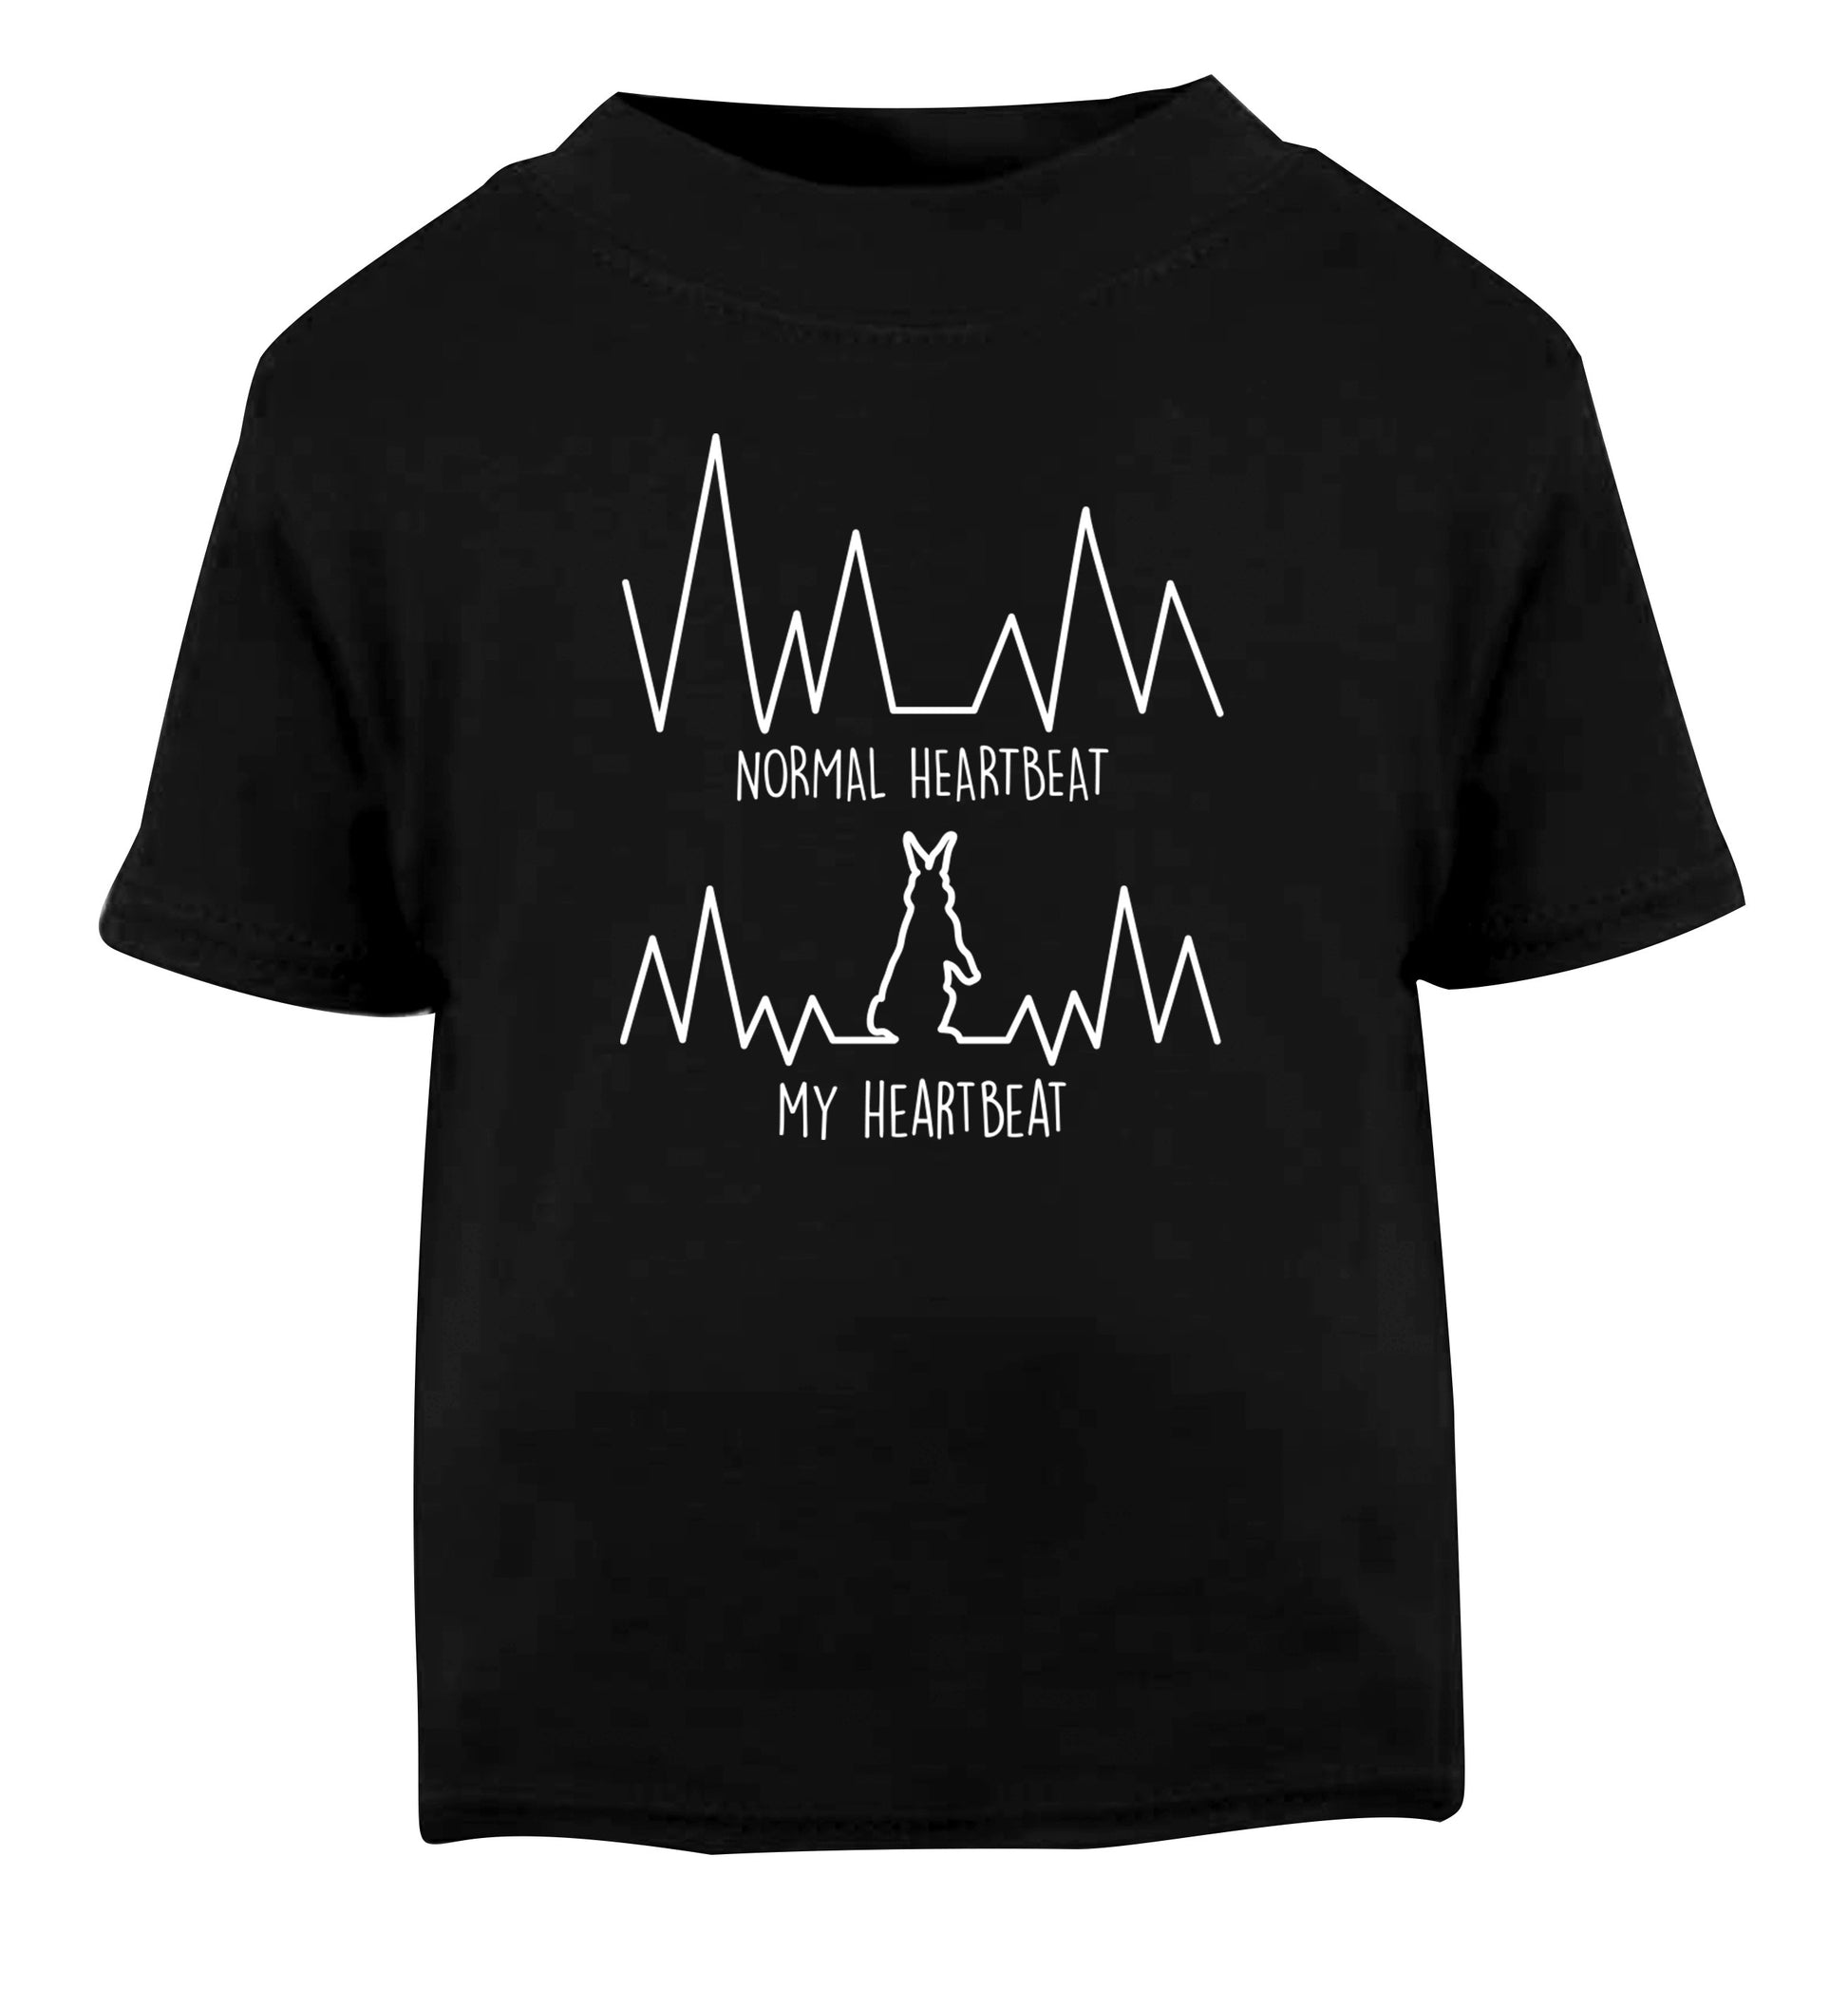 Normal heartbeat, my heartbeat rabbit lover Black Baby Toddler Tshirt 2 years